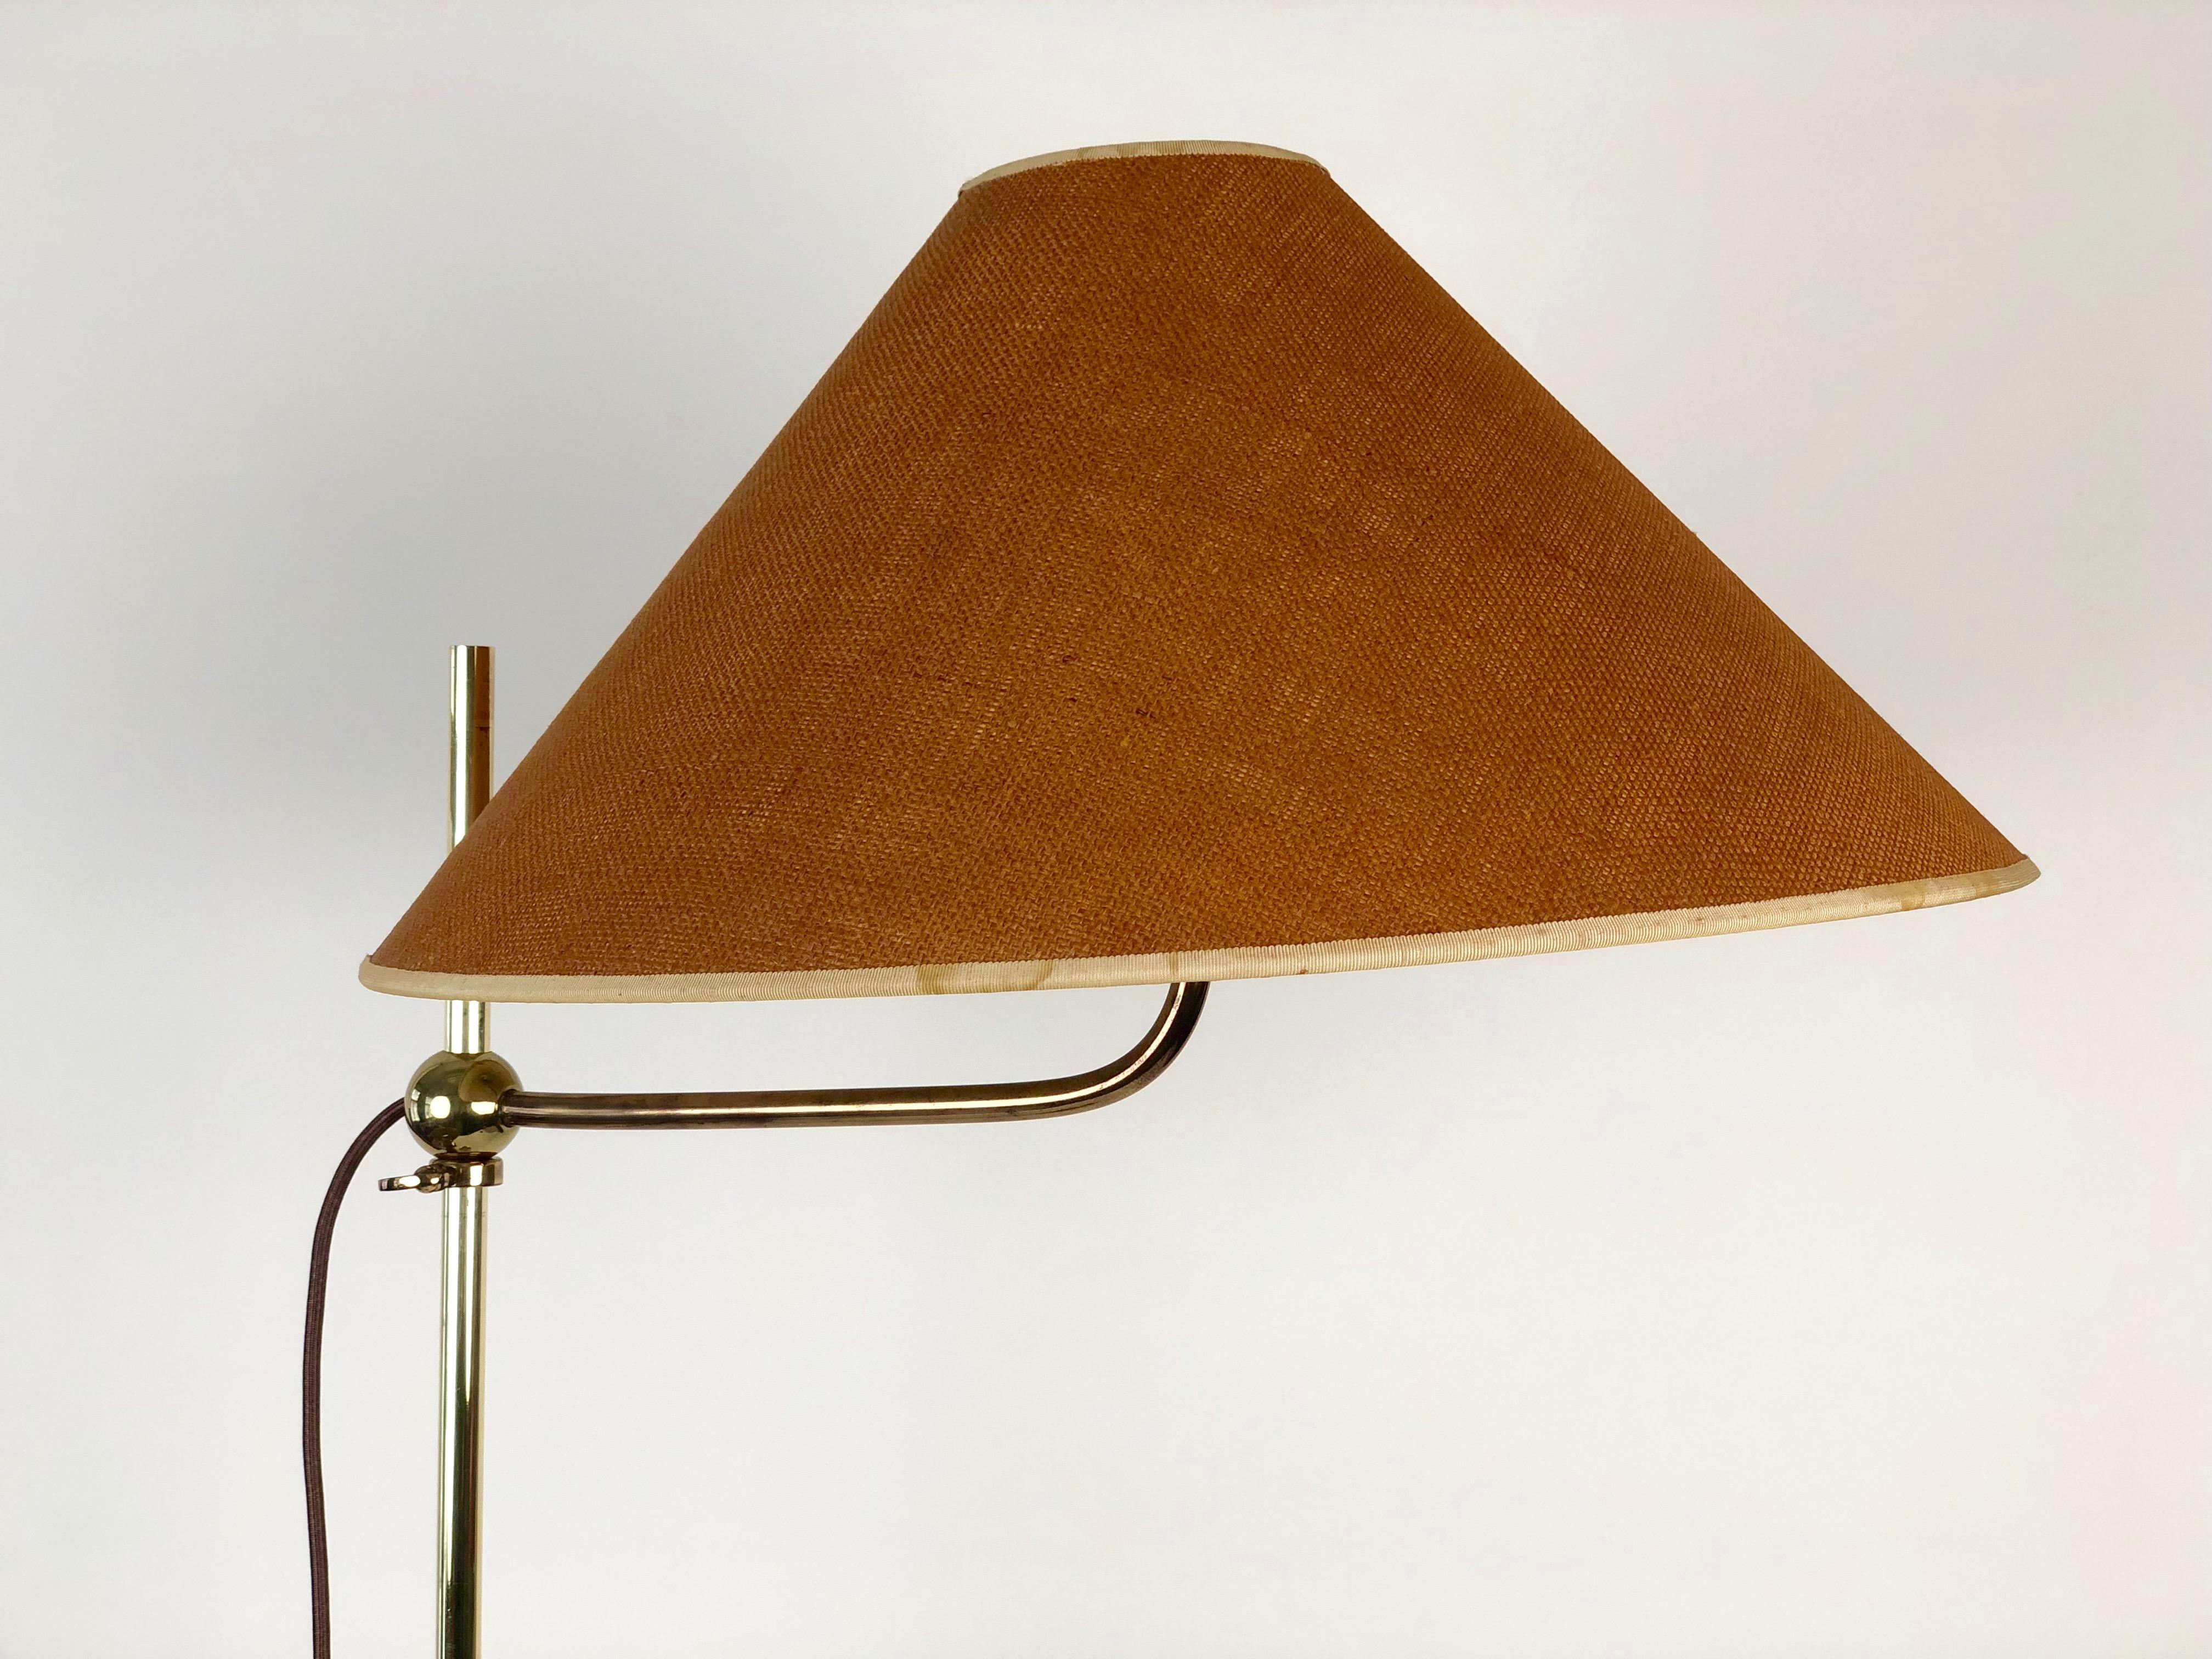 This beautifully made brass lamp, from the 1960 s is fully adjustable in height and rotation of the arm. The simplicity of adjusting the height by using a sliding ball with a locking is wonderfully executed. The arm can rotate 360 degrees without